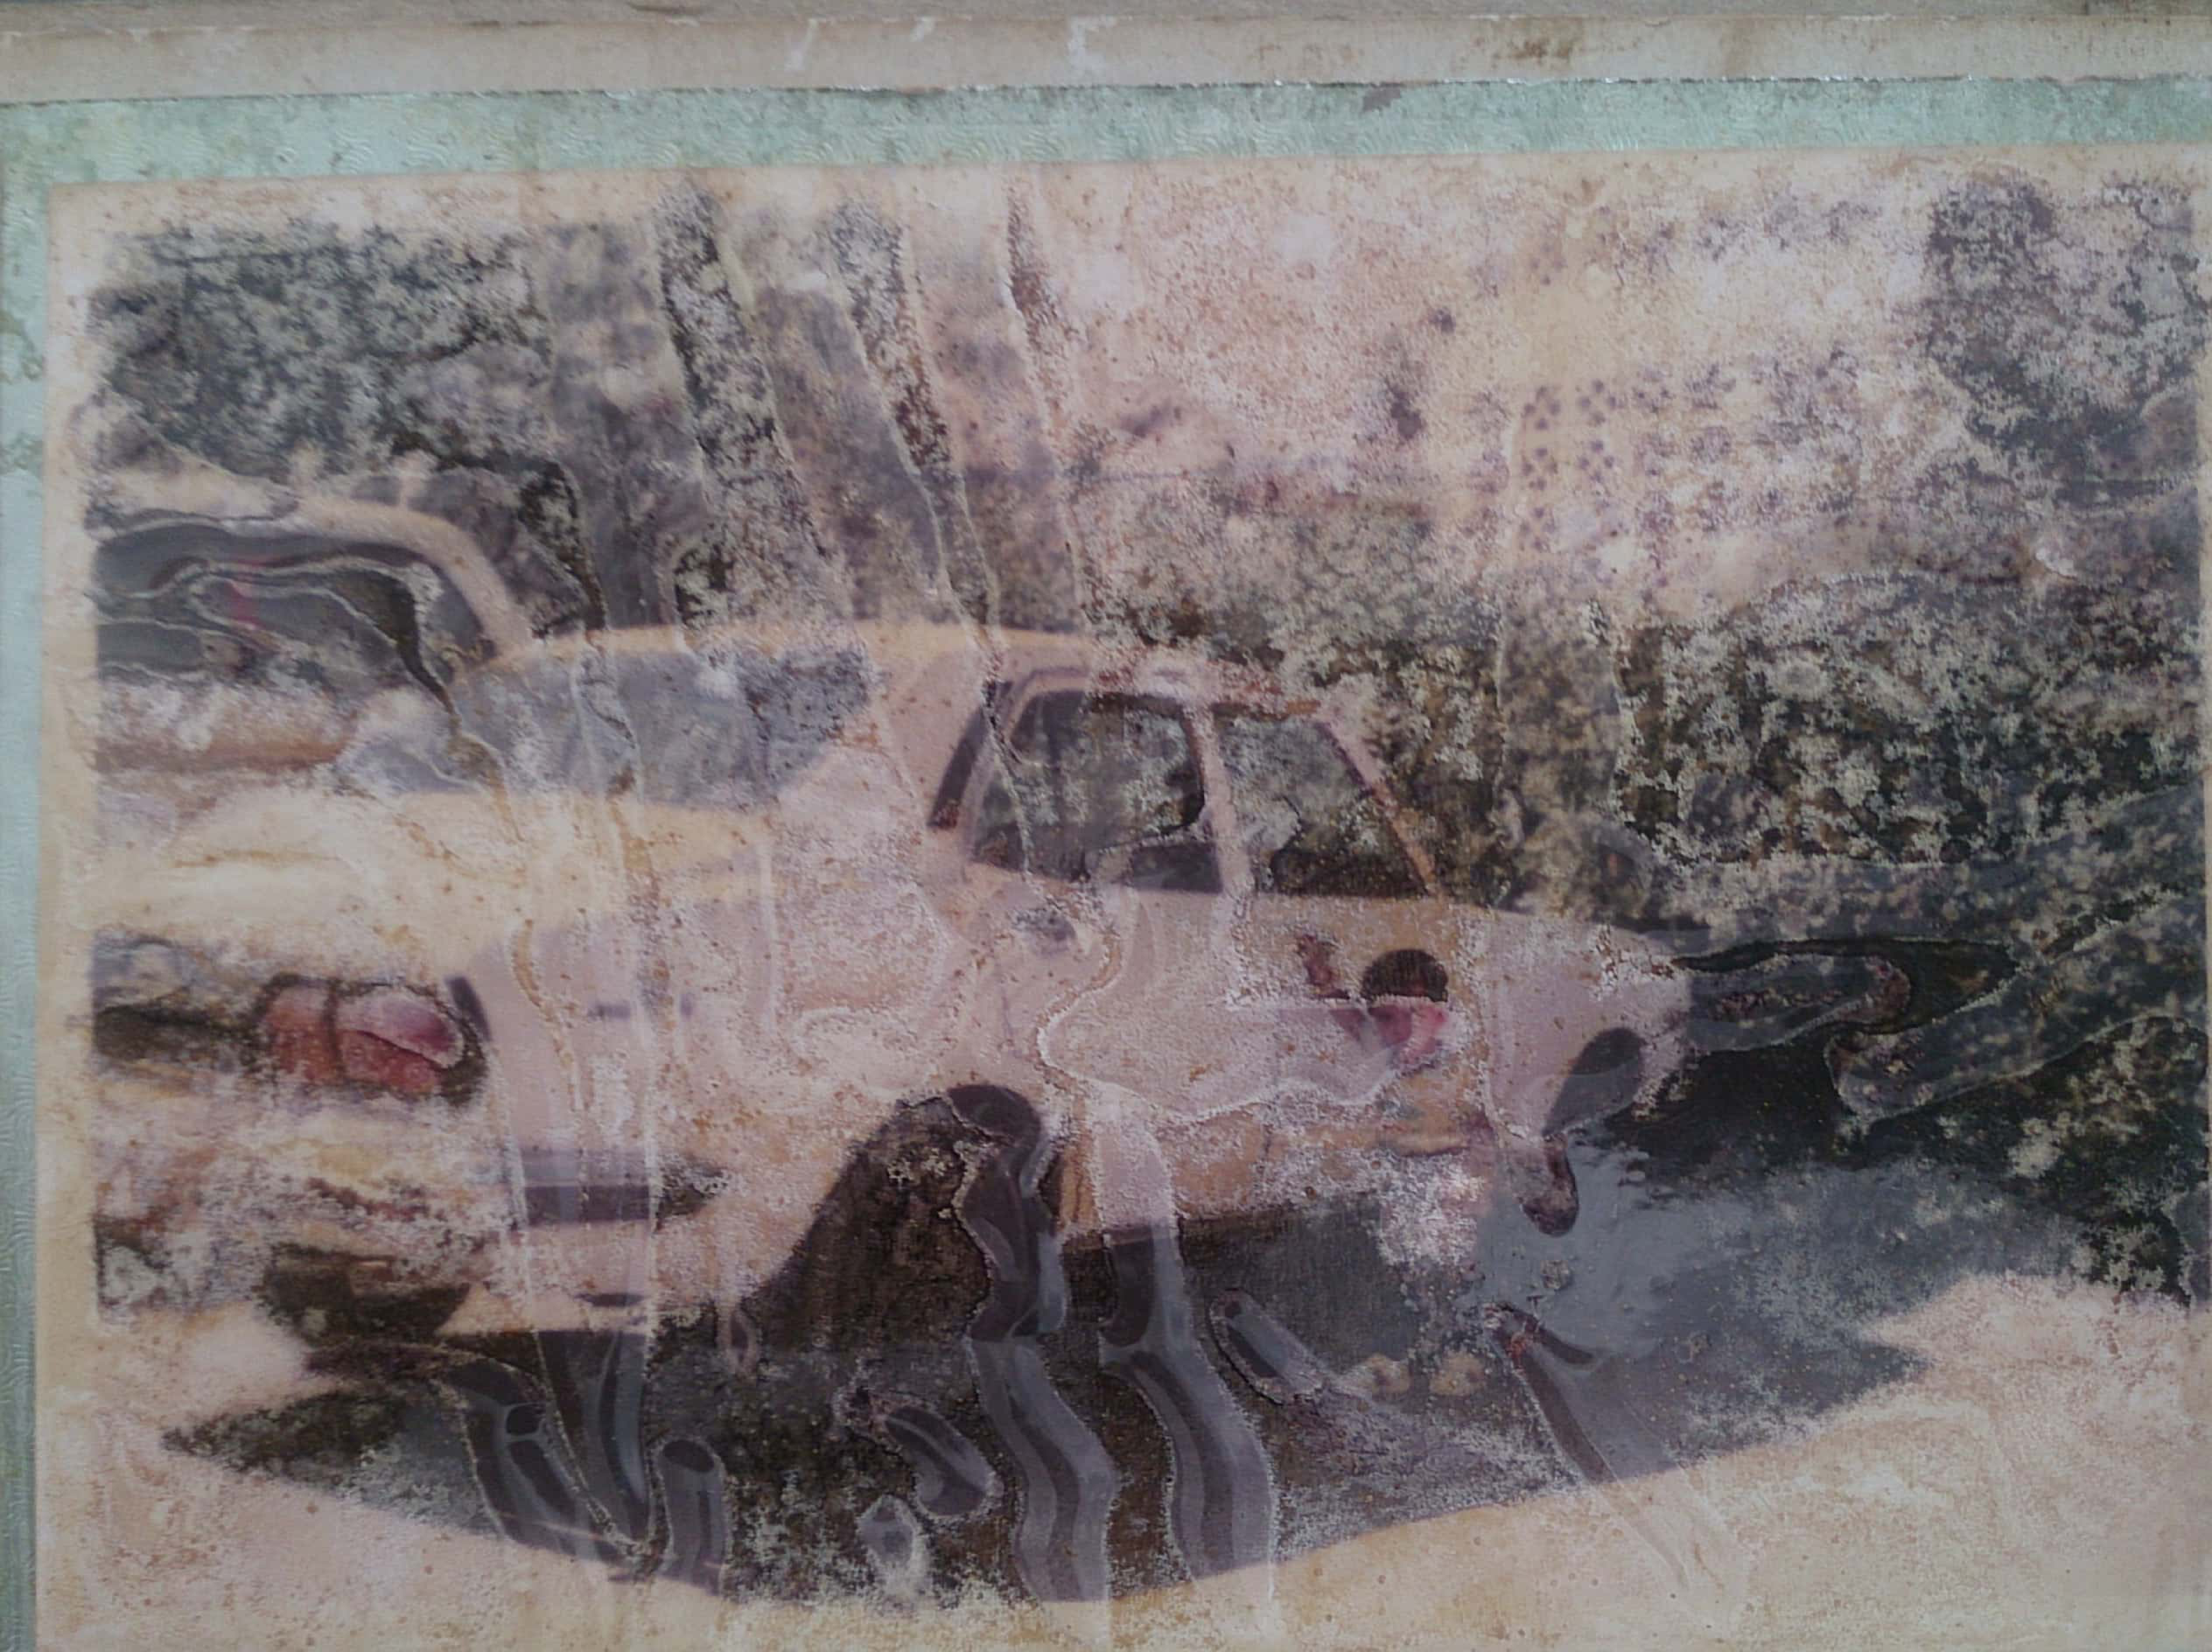 This worn photograph still manage to show a boy by a car. Bada Zayed, 1990